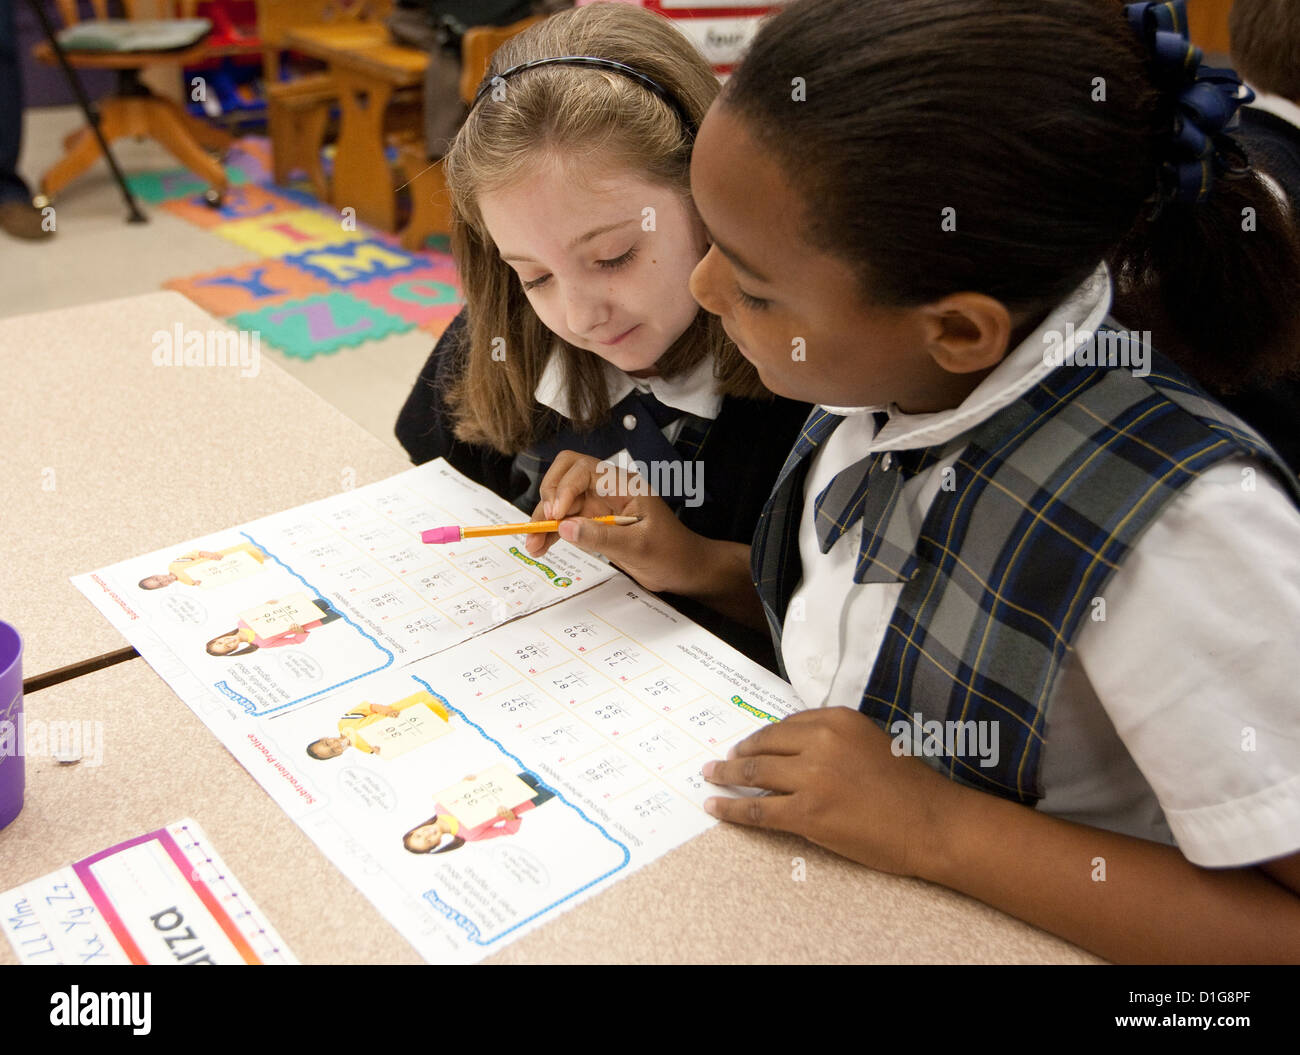 Second grade elementary  children girls Anglo and African-American wearing uniforms complete school work at Catholic school Stock Photo